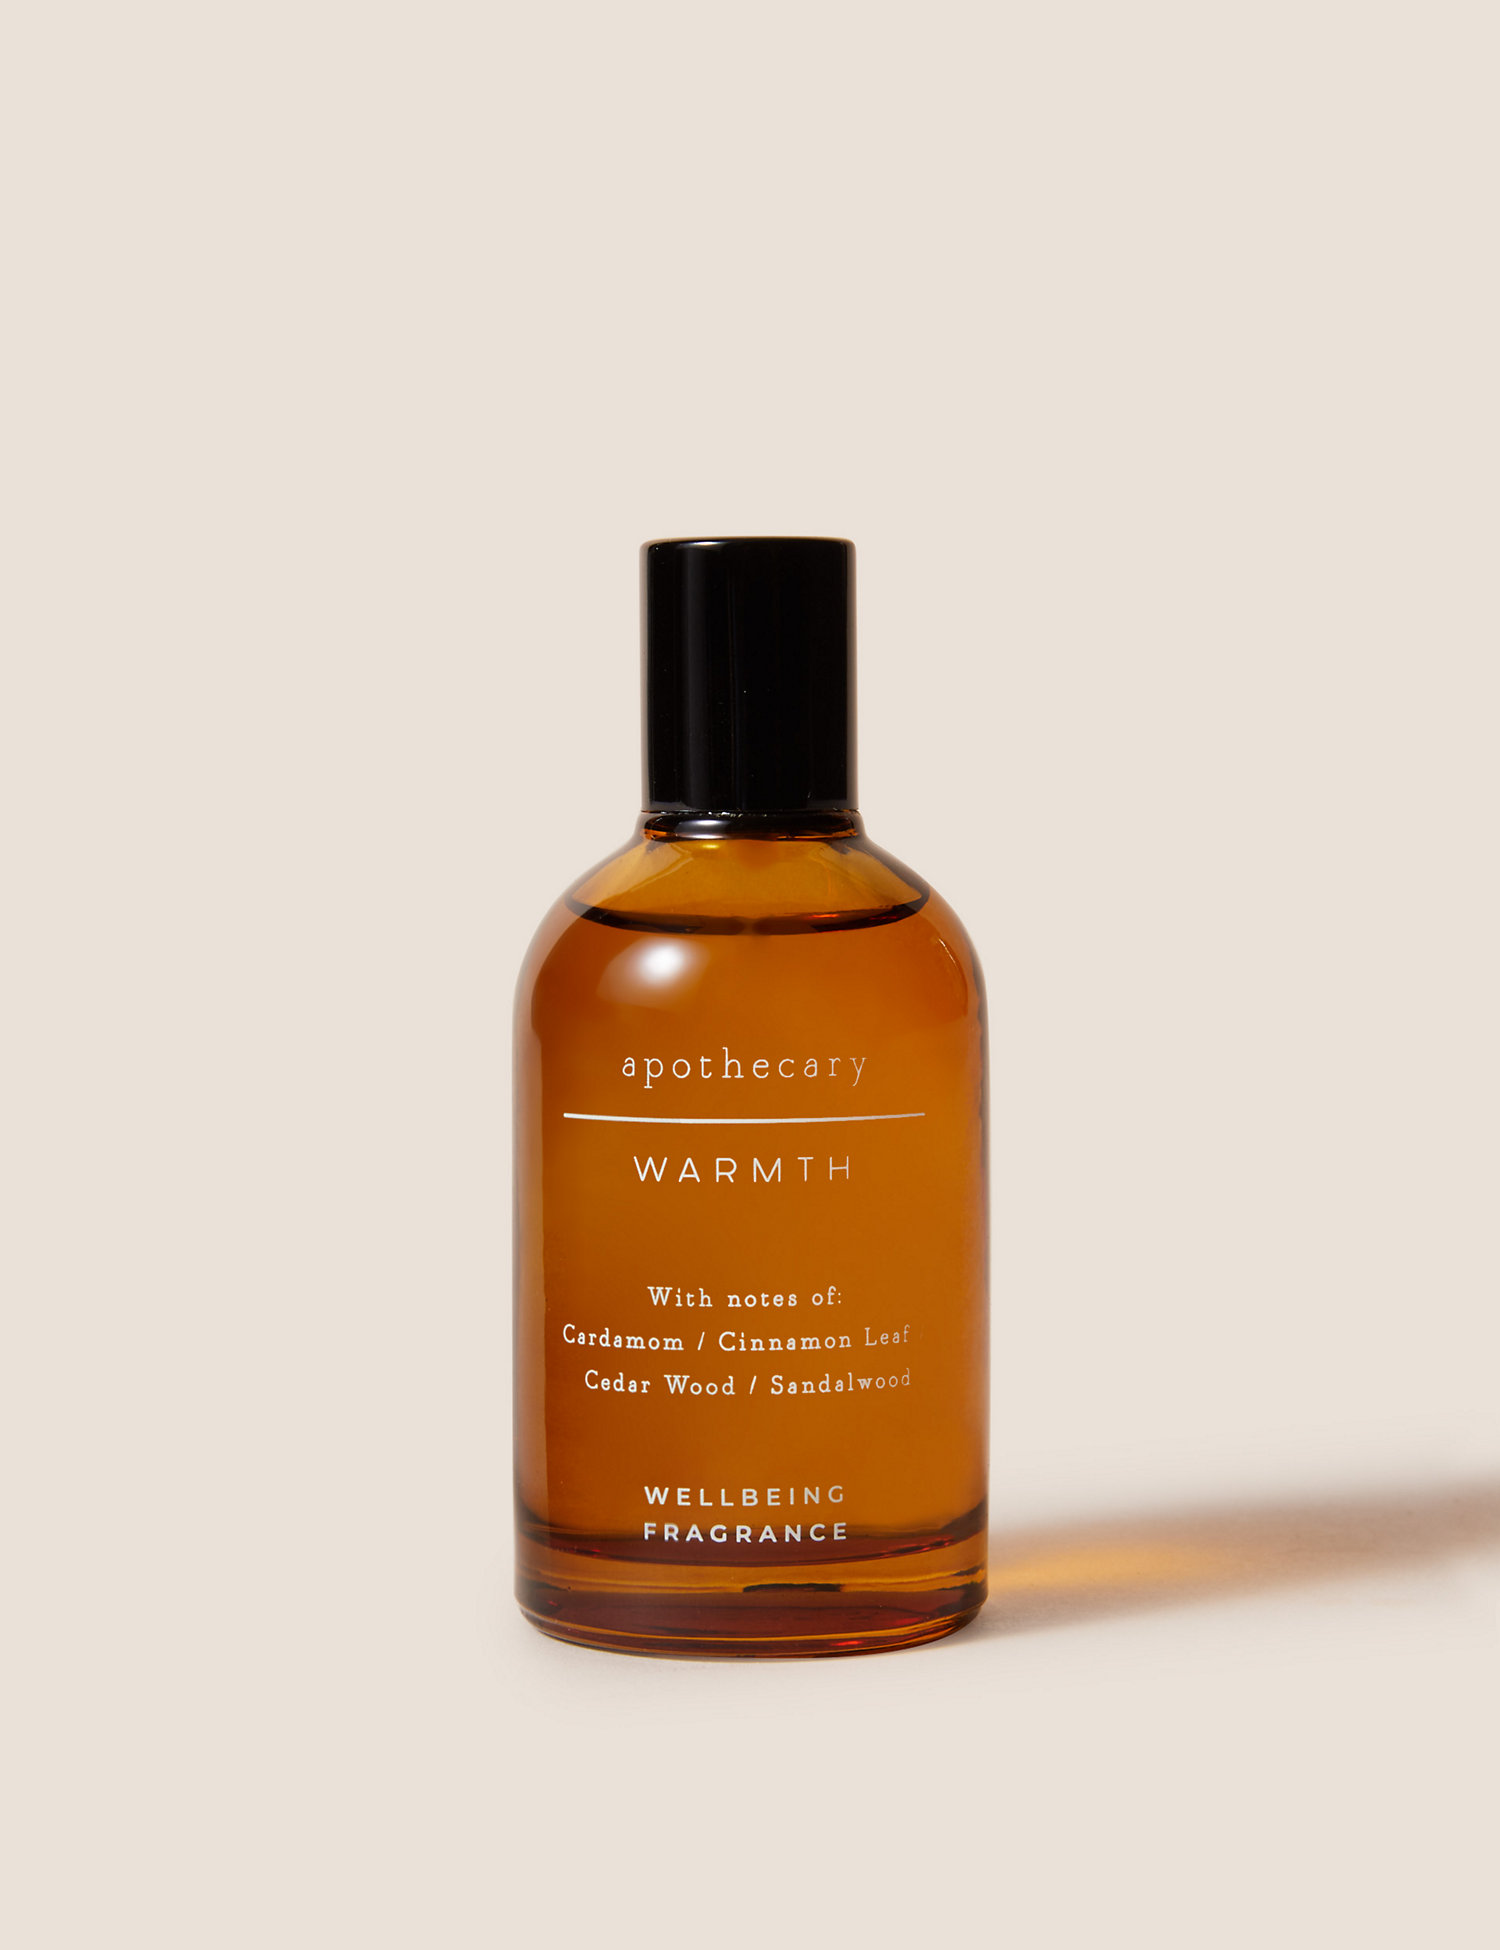 The M&S Apothecary Warmth EDP, £9.50 for 50ml is a great dupe